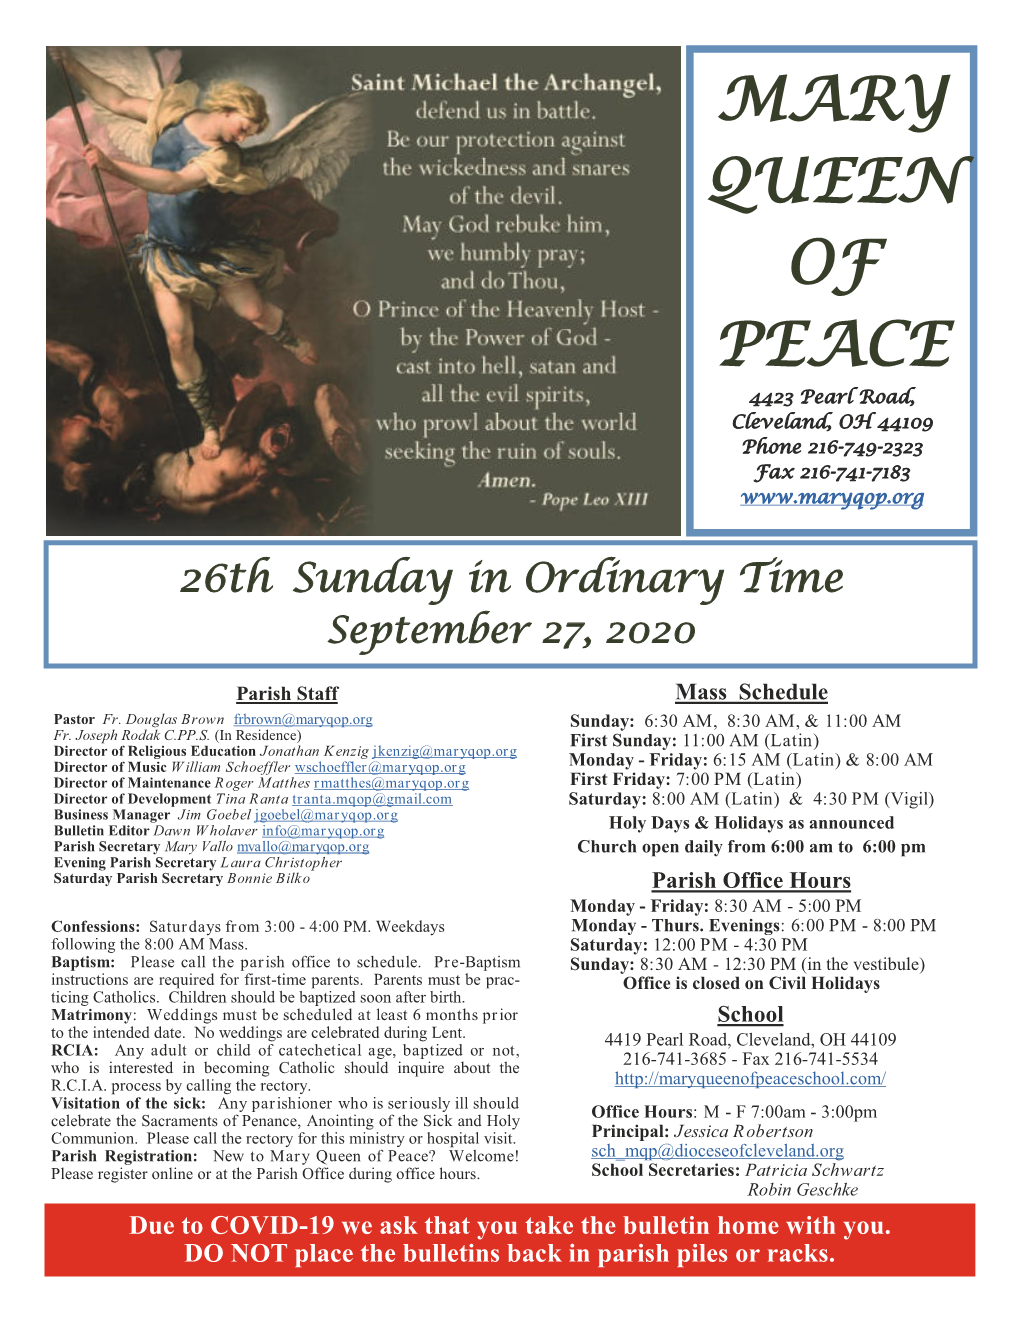 Queen of Peace? Welcome! Sch Mqp@Dioceseofcleveland.Org Please Register Online Or at the Parish Office During Office Hours